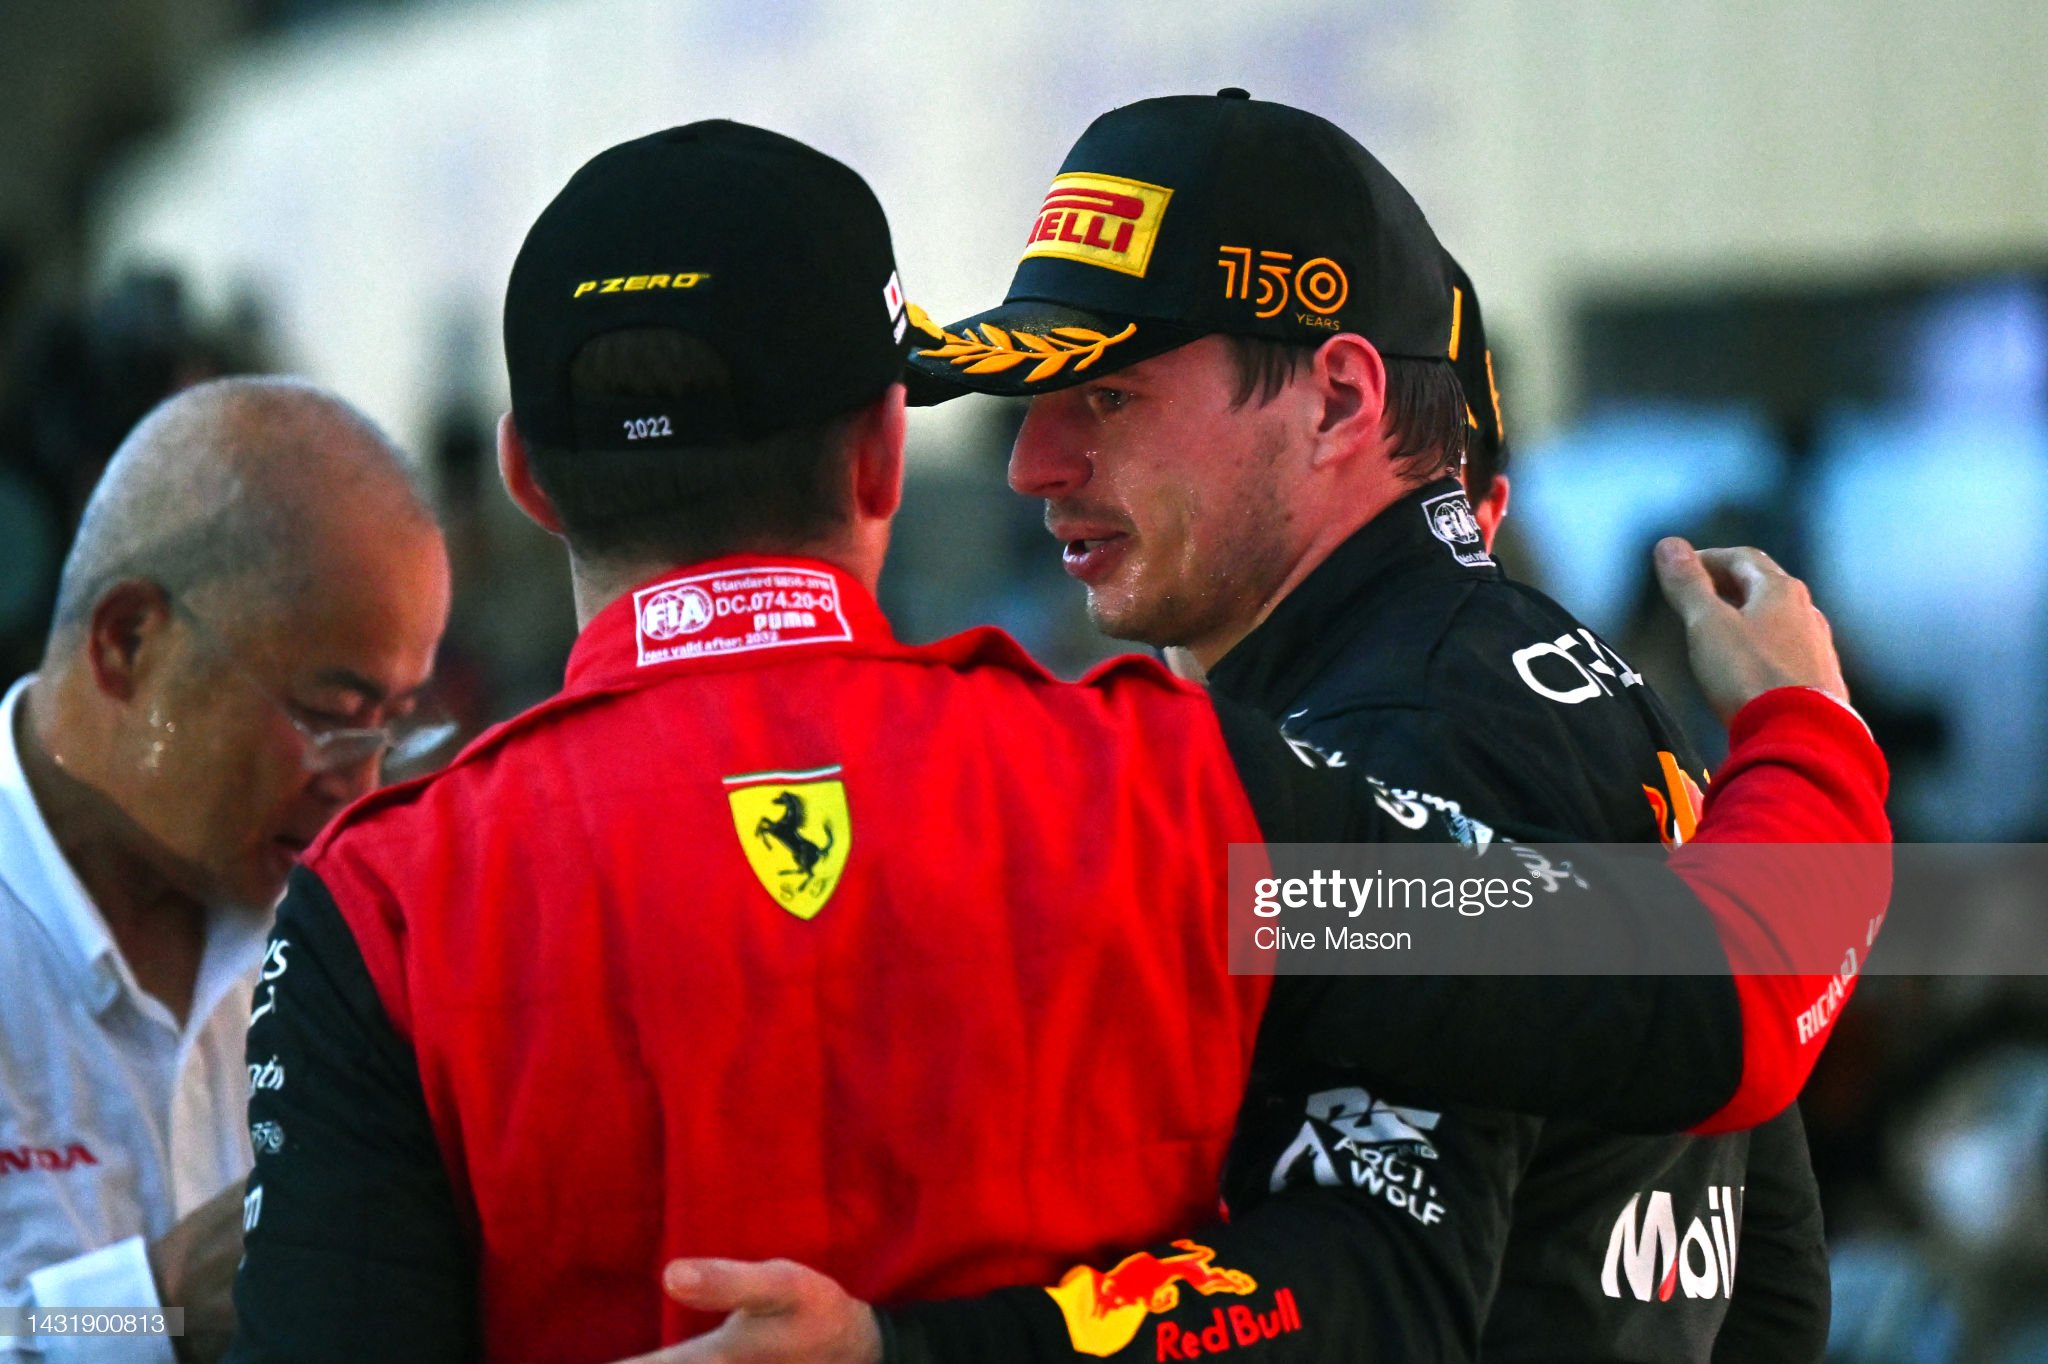 Max Verstappen and Charles Leclerc celebrate on the podium.